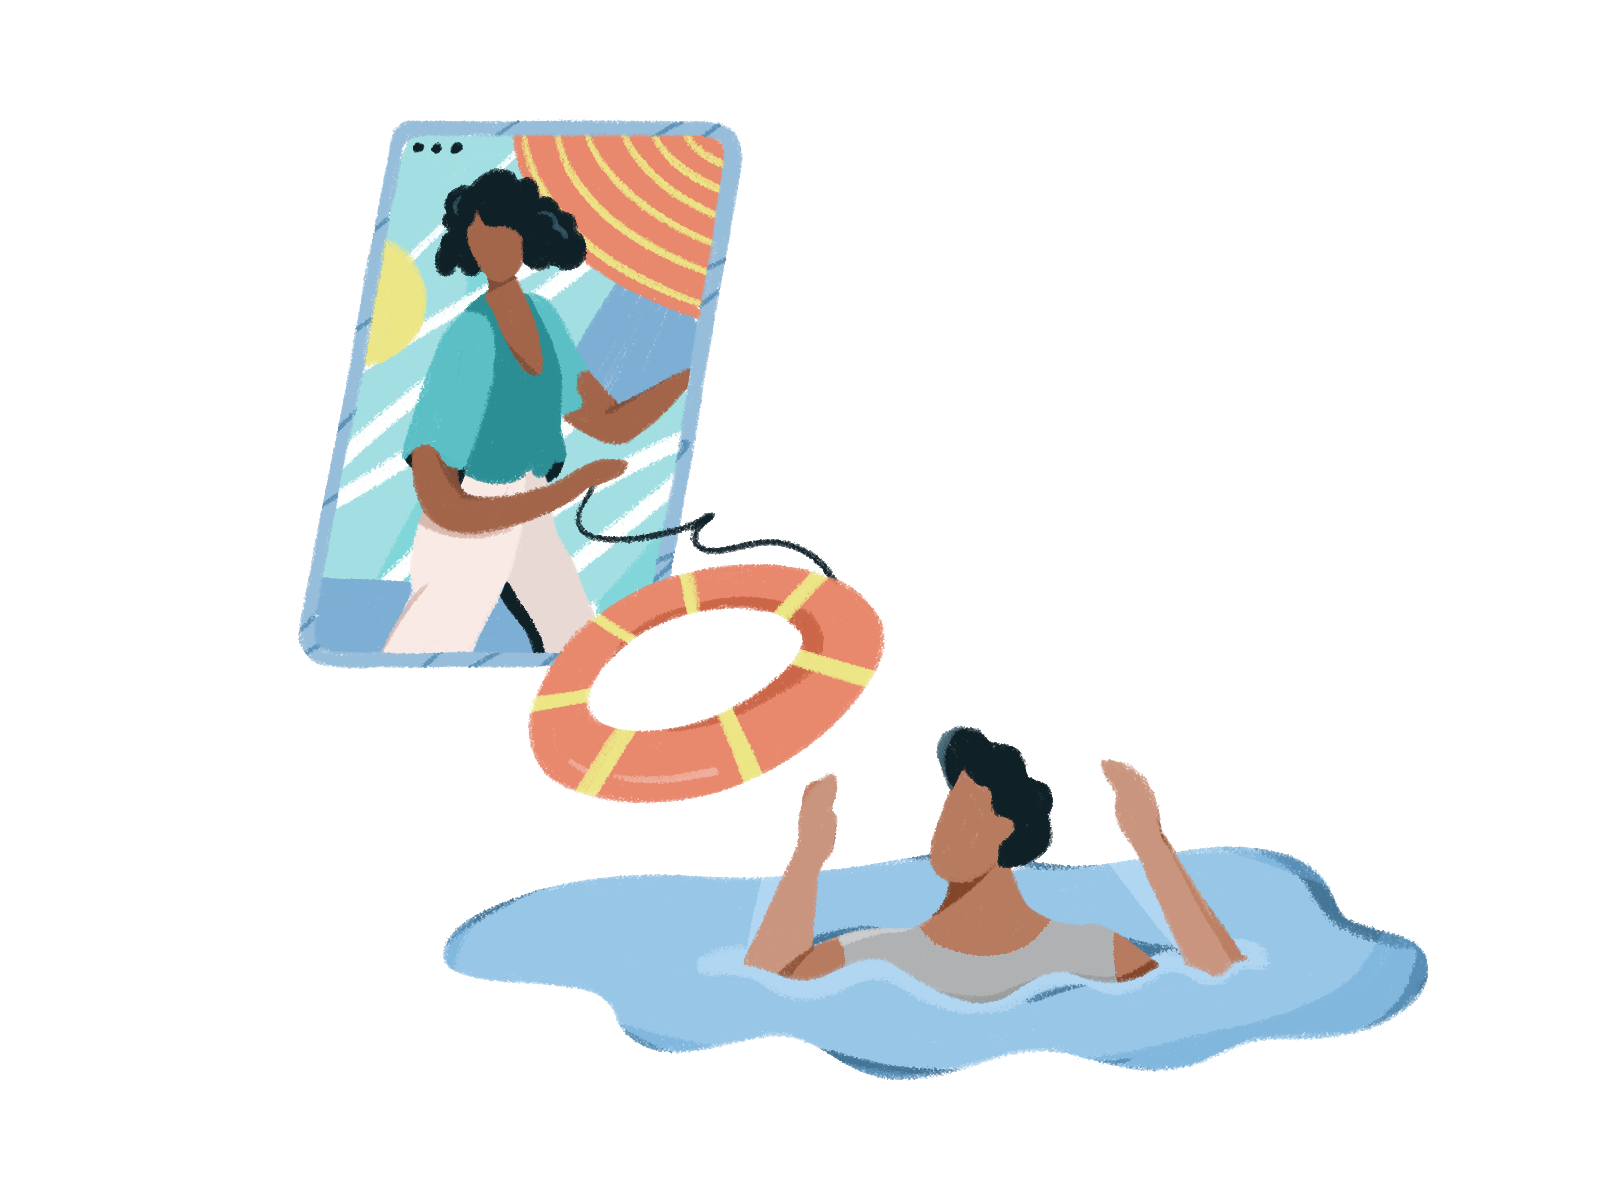 Illustration of a woman throwing a lifebuoy to a distressed person, symbolizing providing a lifeline for people in crisis